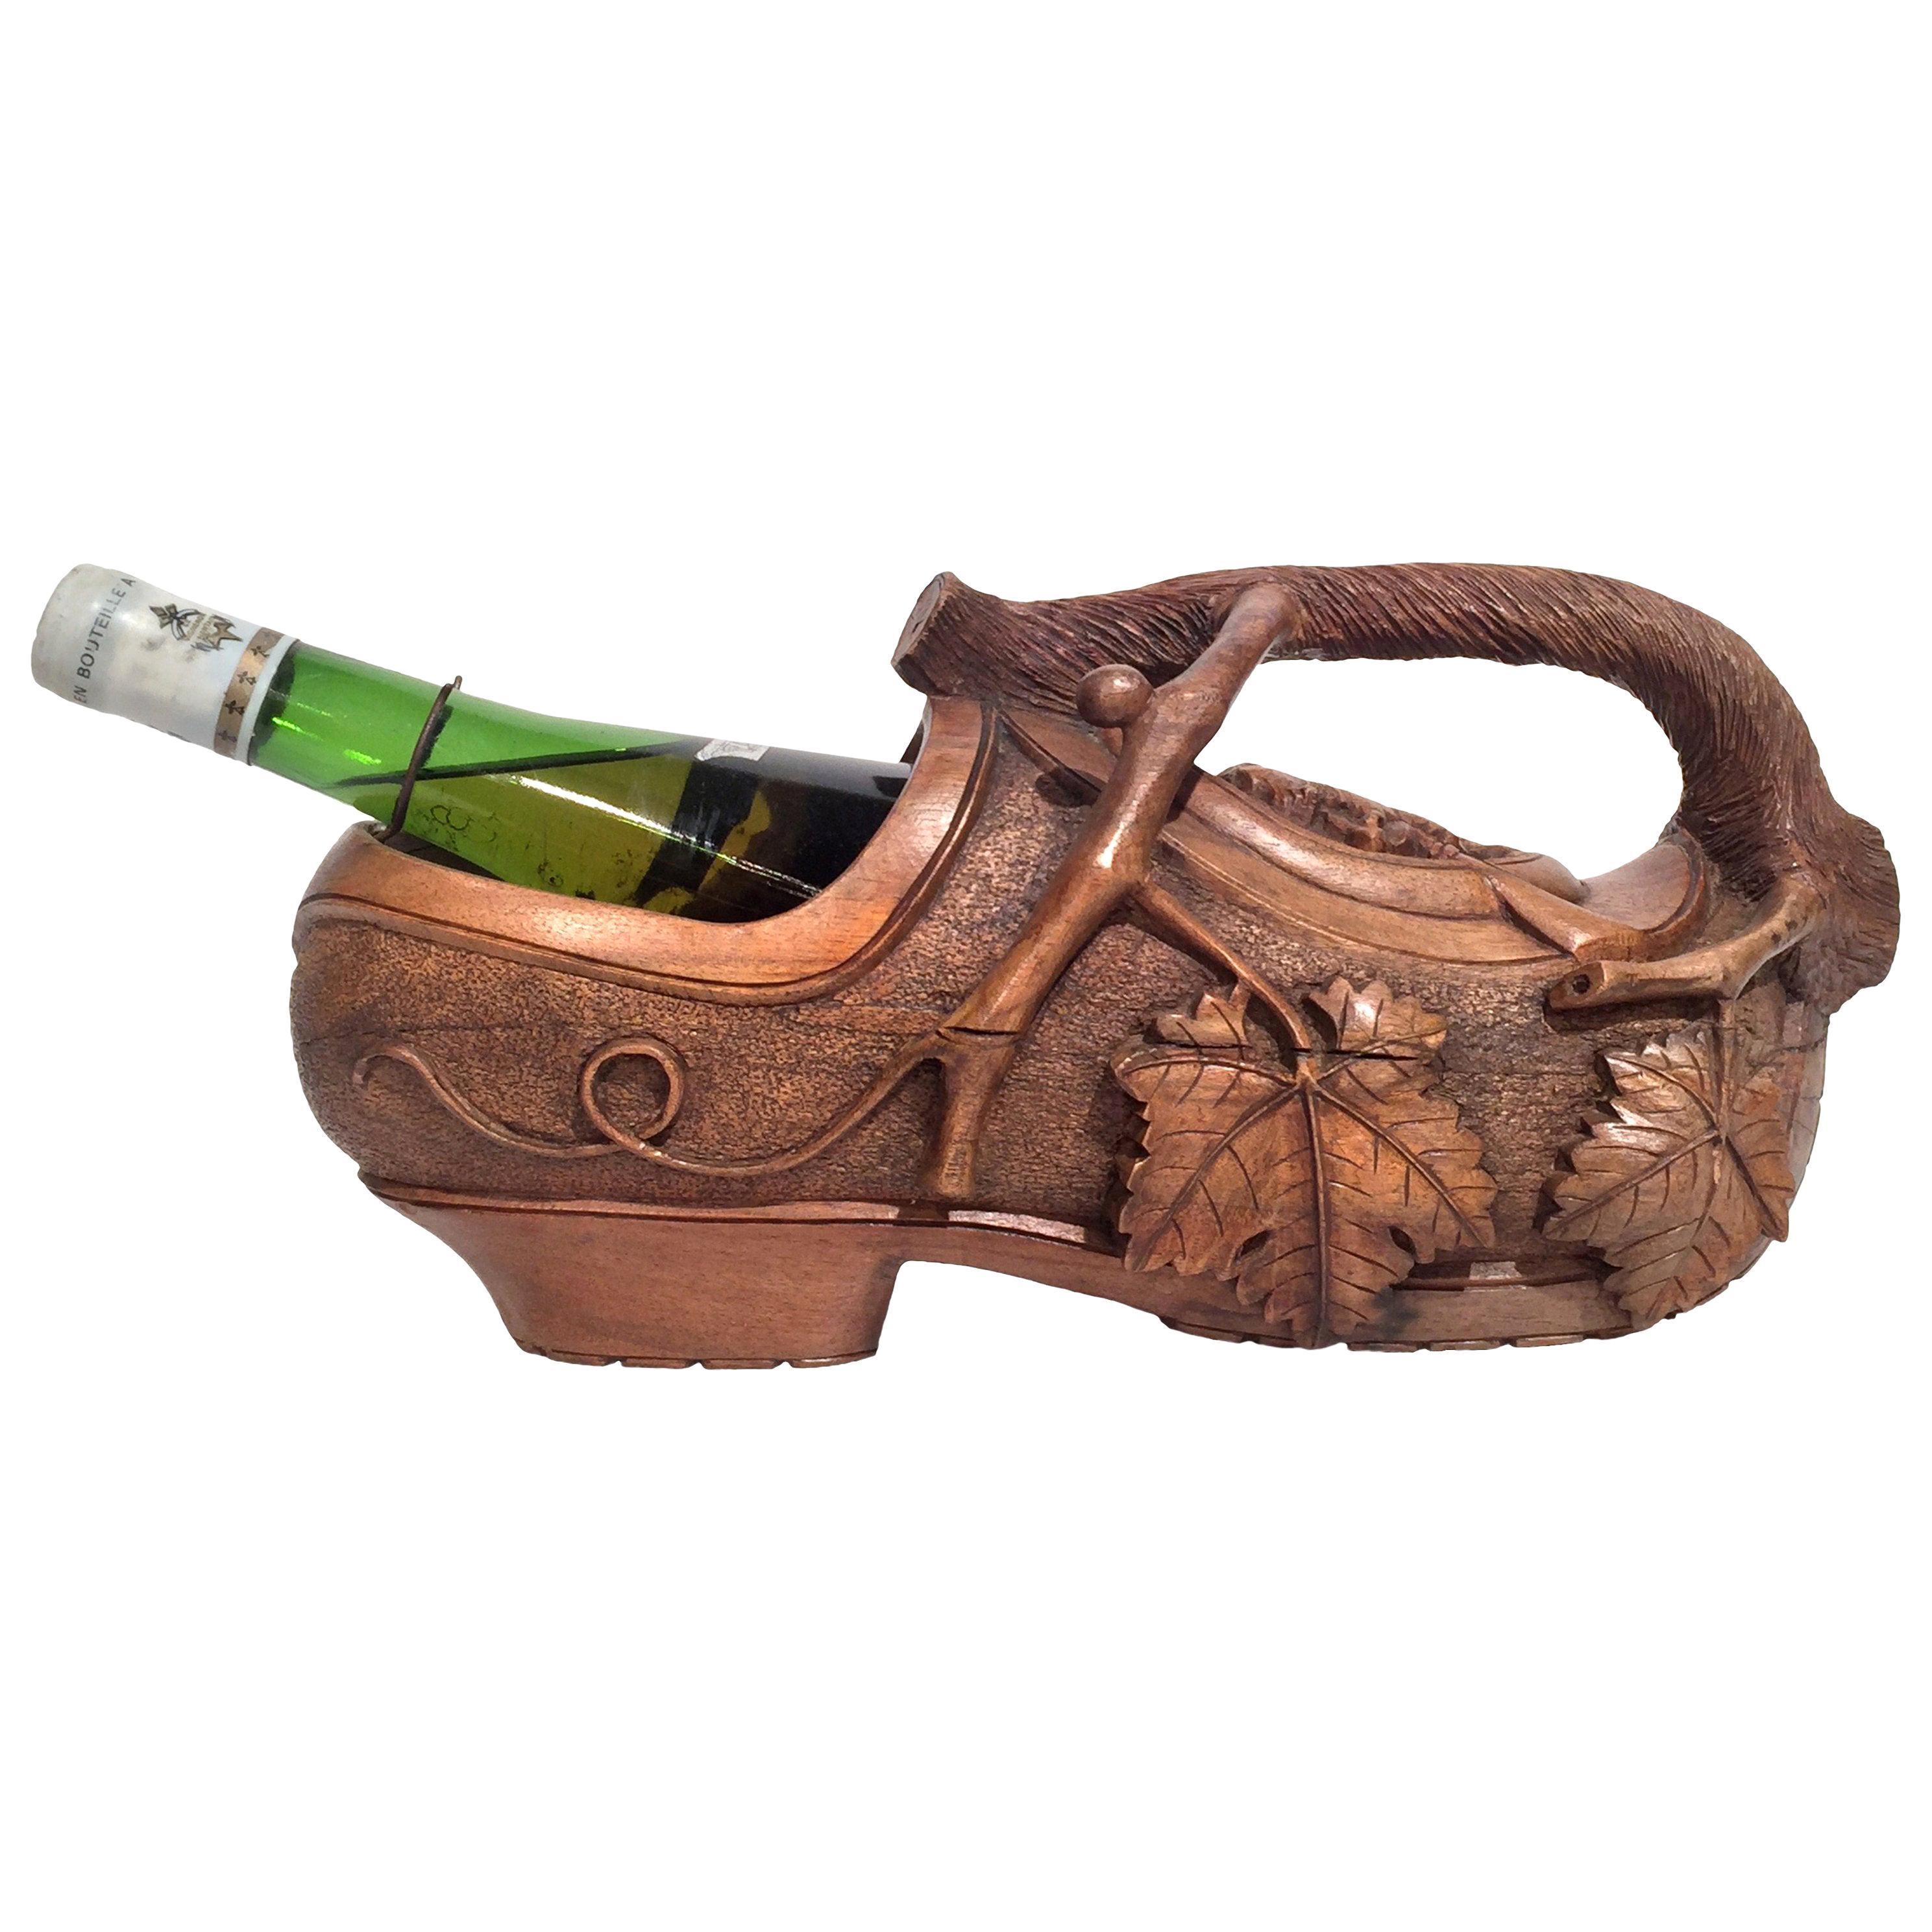 Early 20th Century French Carved Walnut Wine Bottle Holder Clog with Vine Decor For Sale